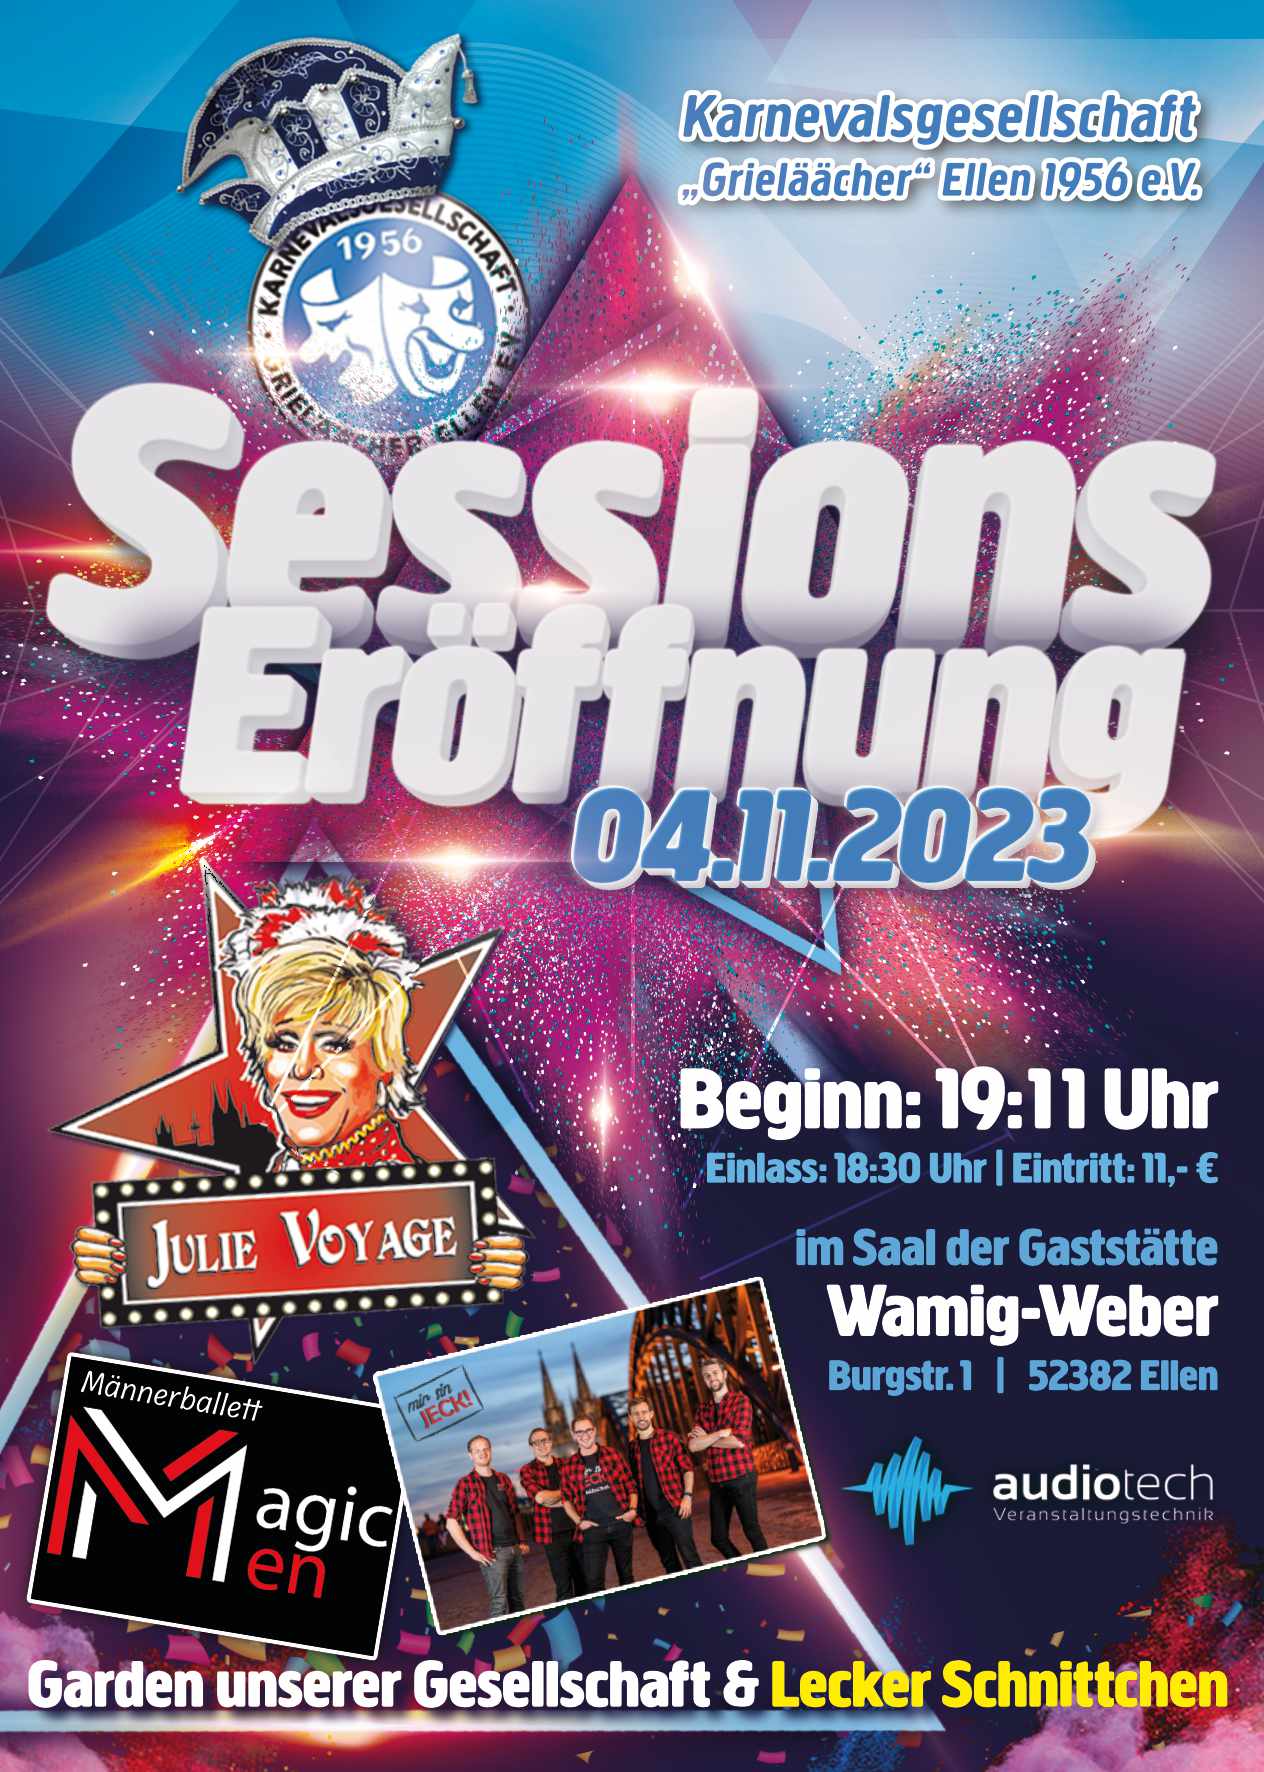 You are currently viewing Sessionseröffnung am 04. November